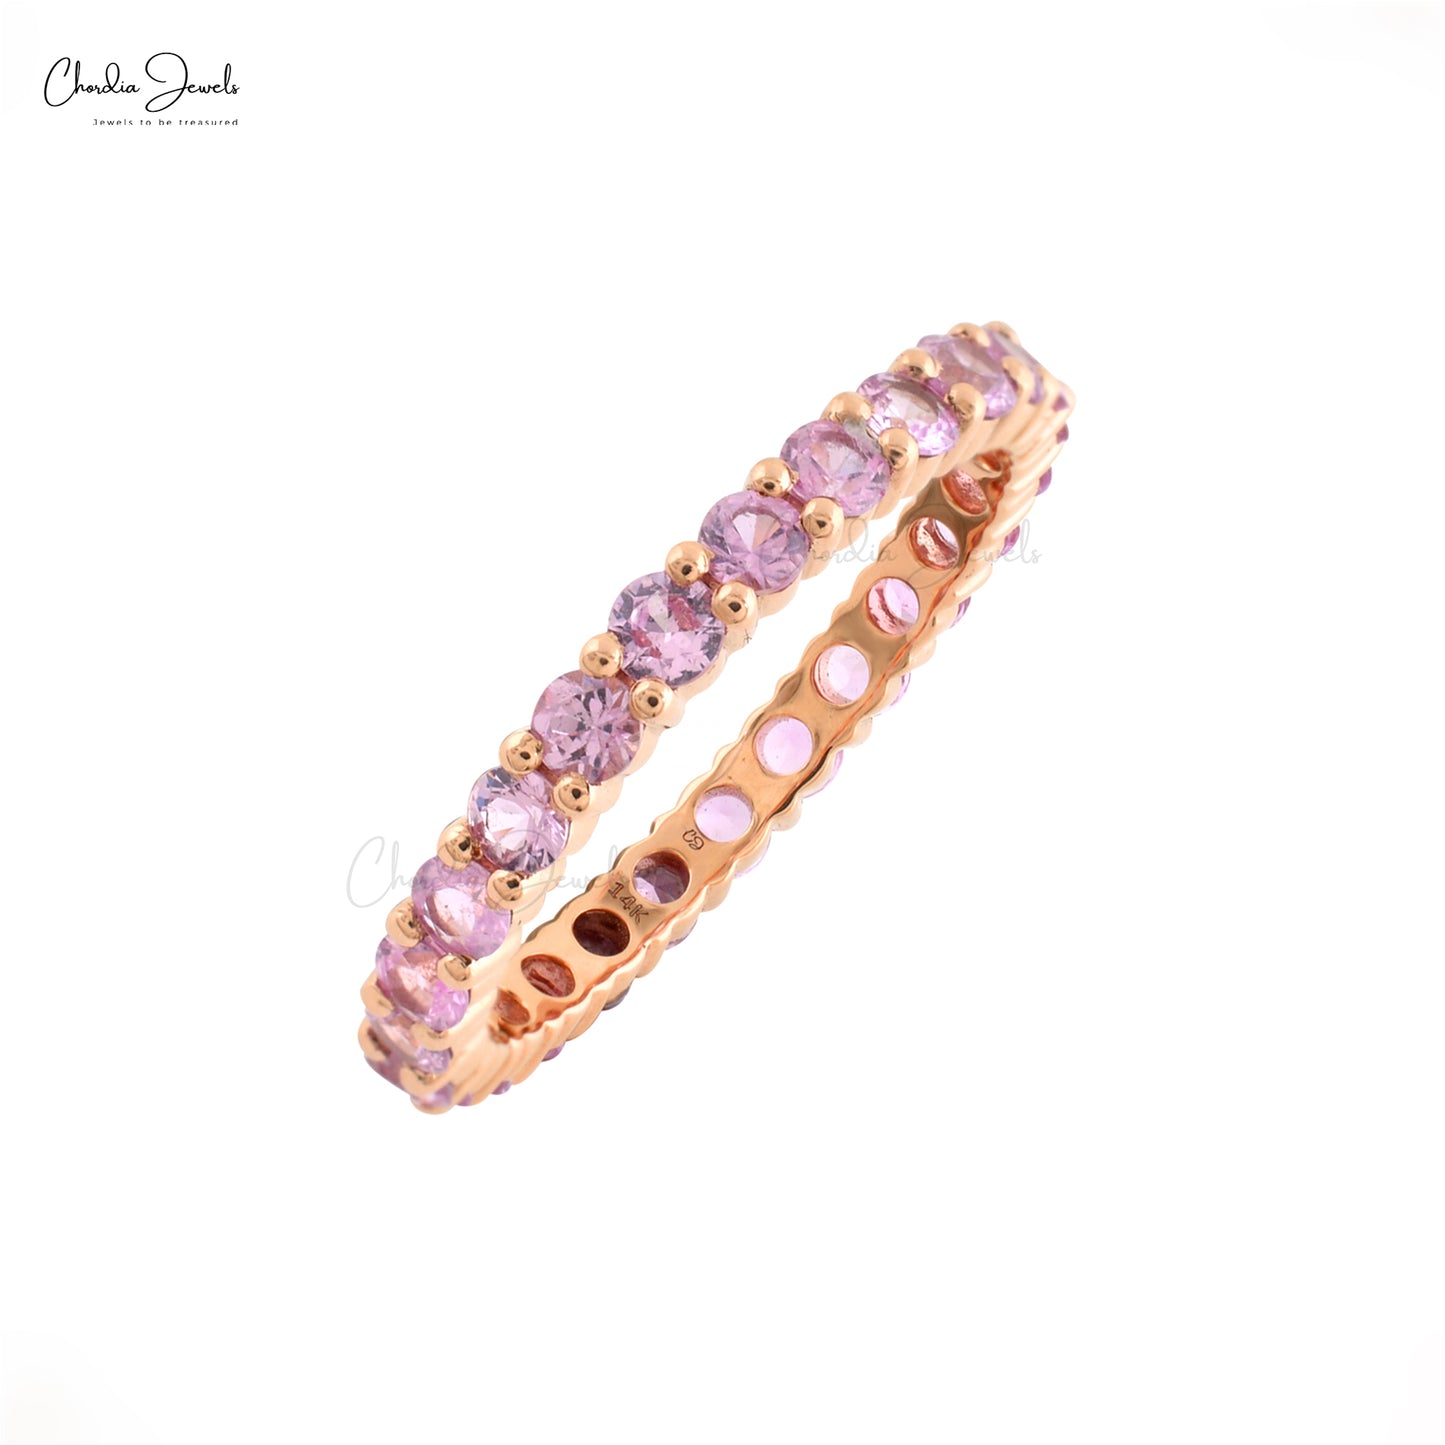 Load image into Gallery viewer, Natural 1.26 Carat Pink Sapphire Full Eternity Band, 2.50mm Round Cut September Birthstone Gemstone Band For Women in 14k Solid Rose Gold
